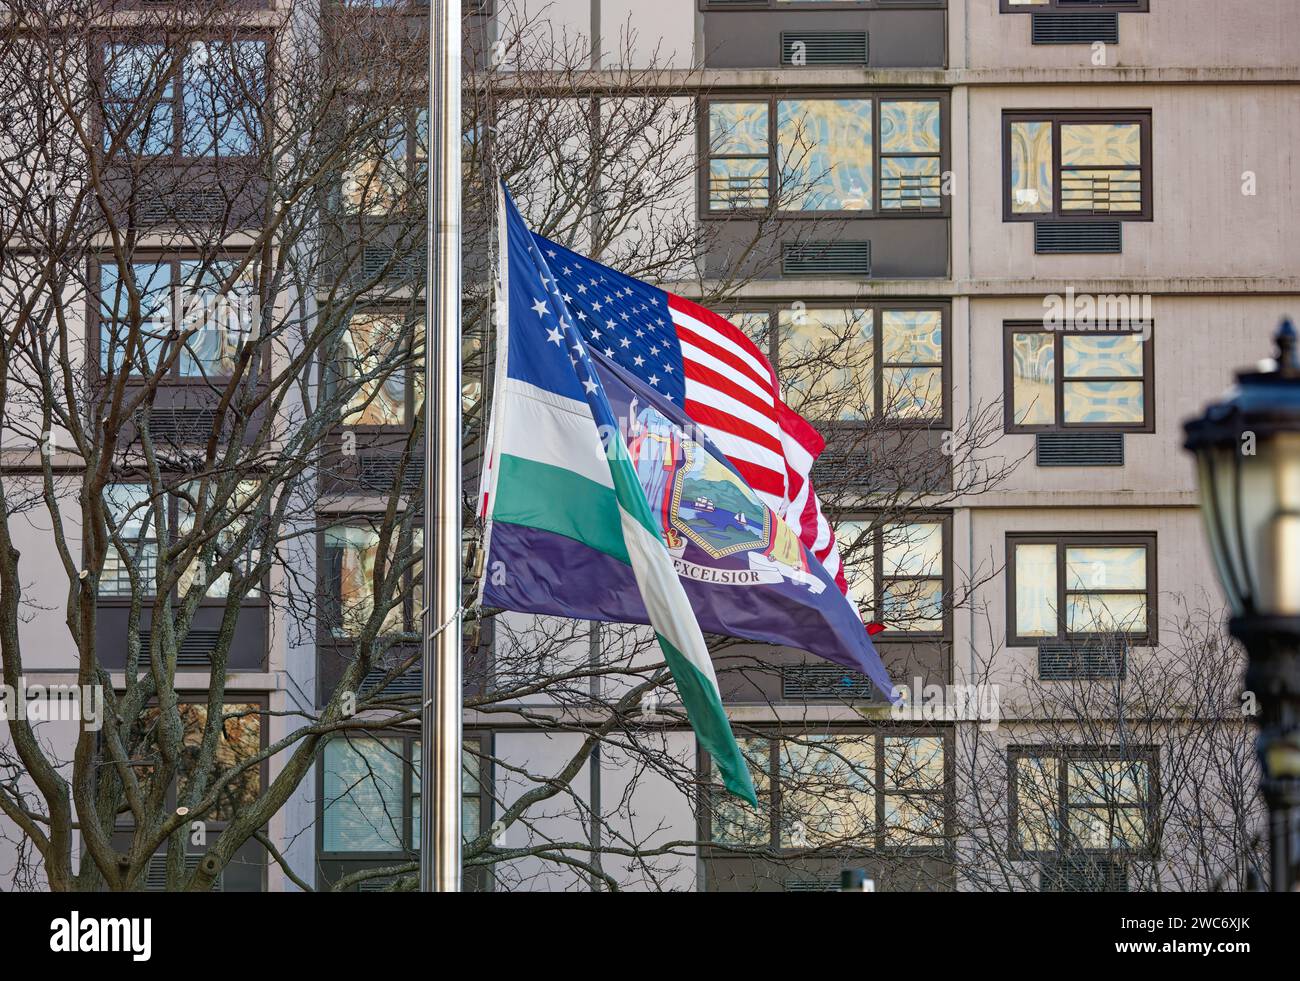 Flags of the United States, New York State, and the New York City Police Department fly at the New York City Police Memorial in Battery Park City. Stock Photo